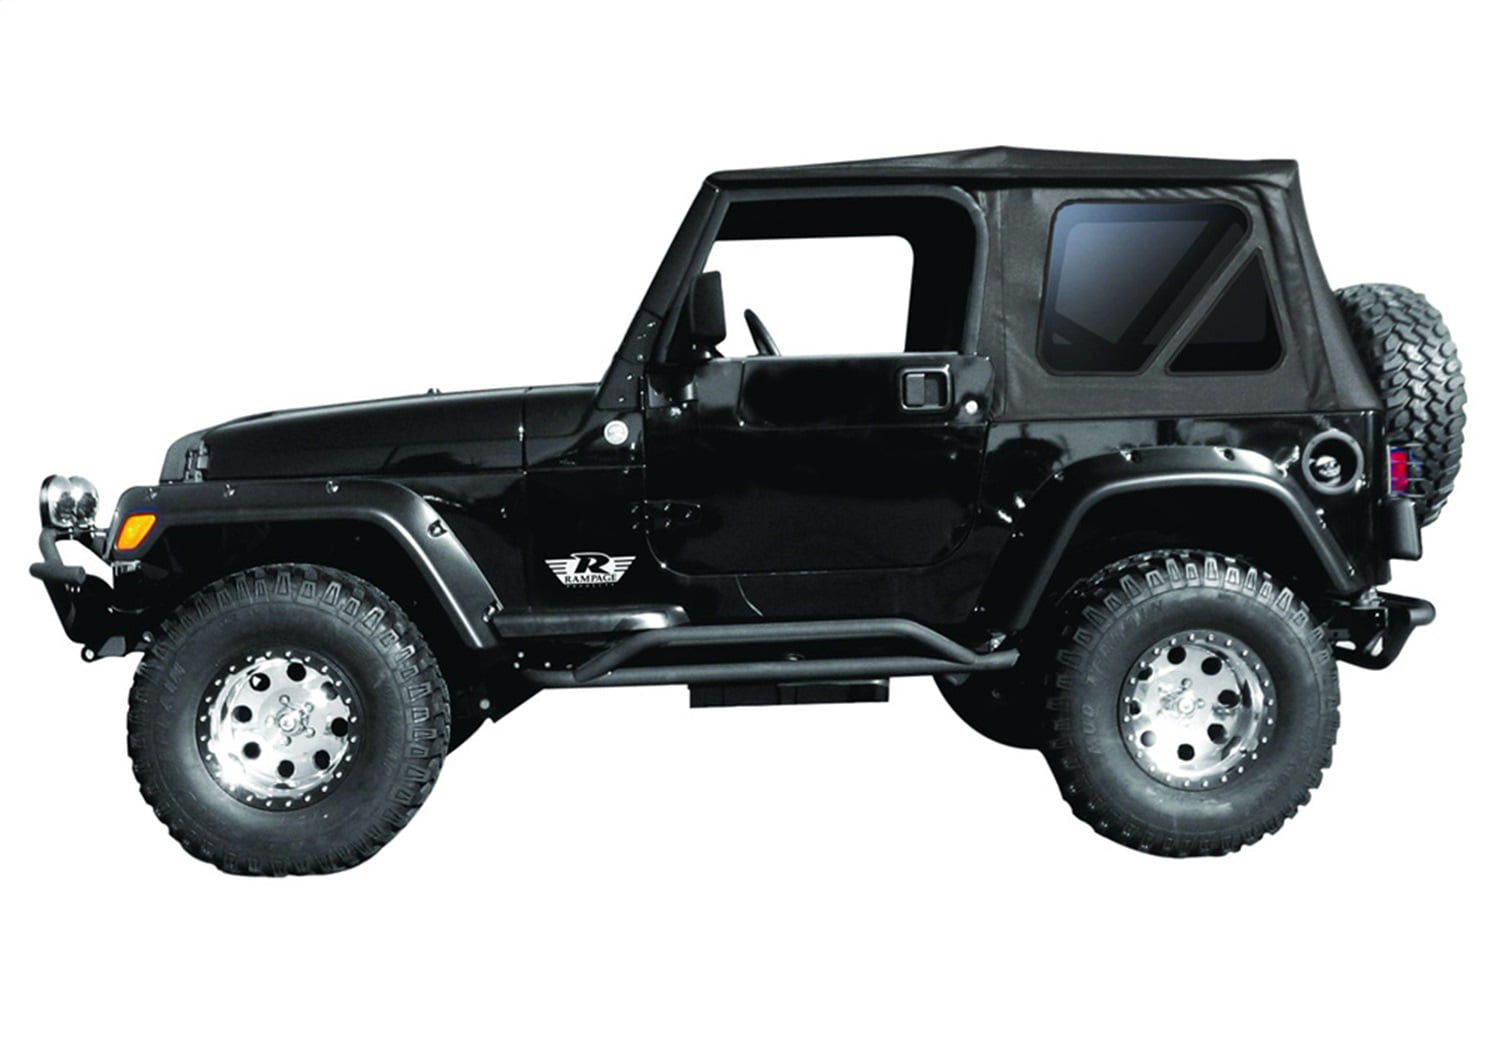 Black Designcovers Fits 1987 to 1995 Jeep Wrangler YJ Paw Prints 22 Color Variations 